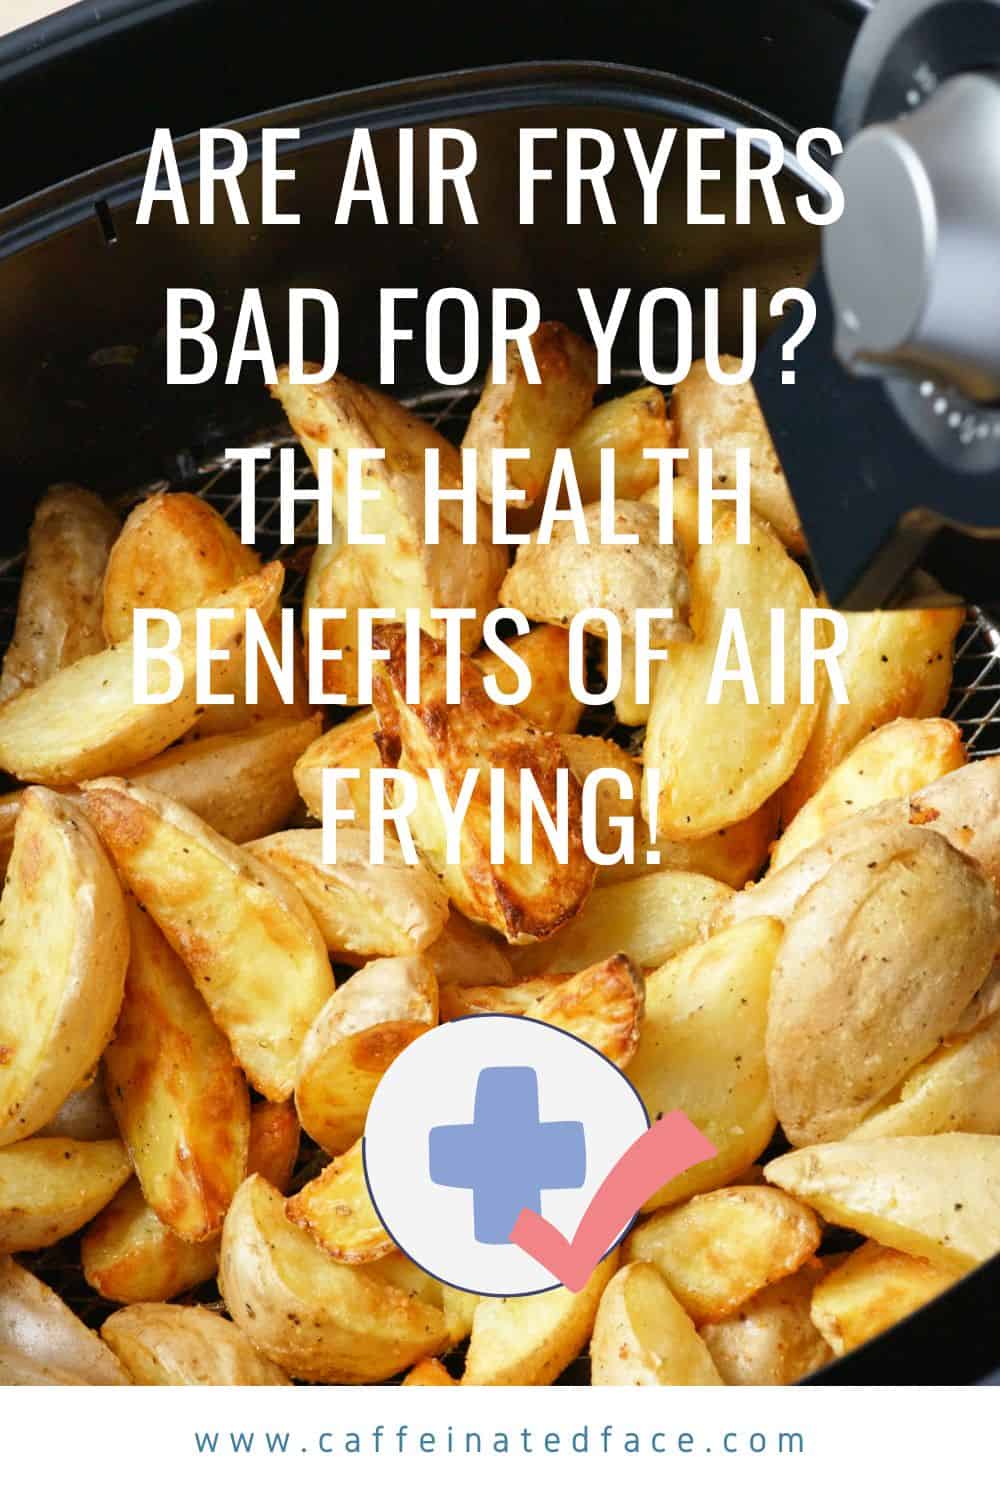 Are Air Fryers Bad for You (1)